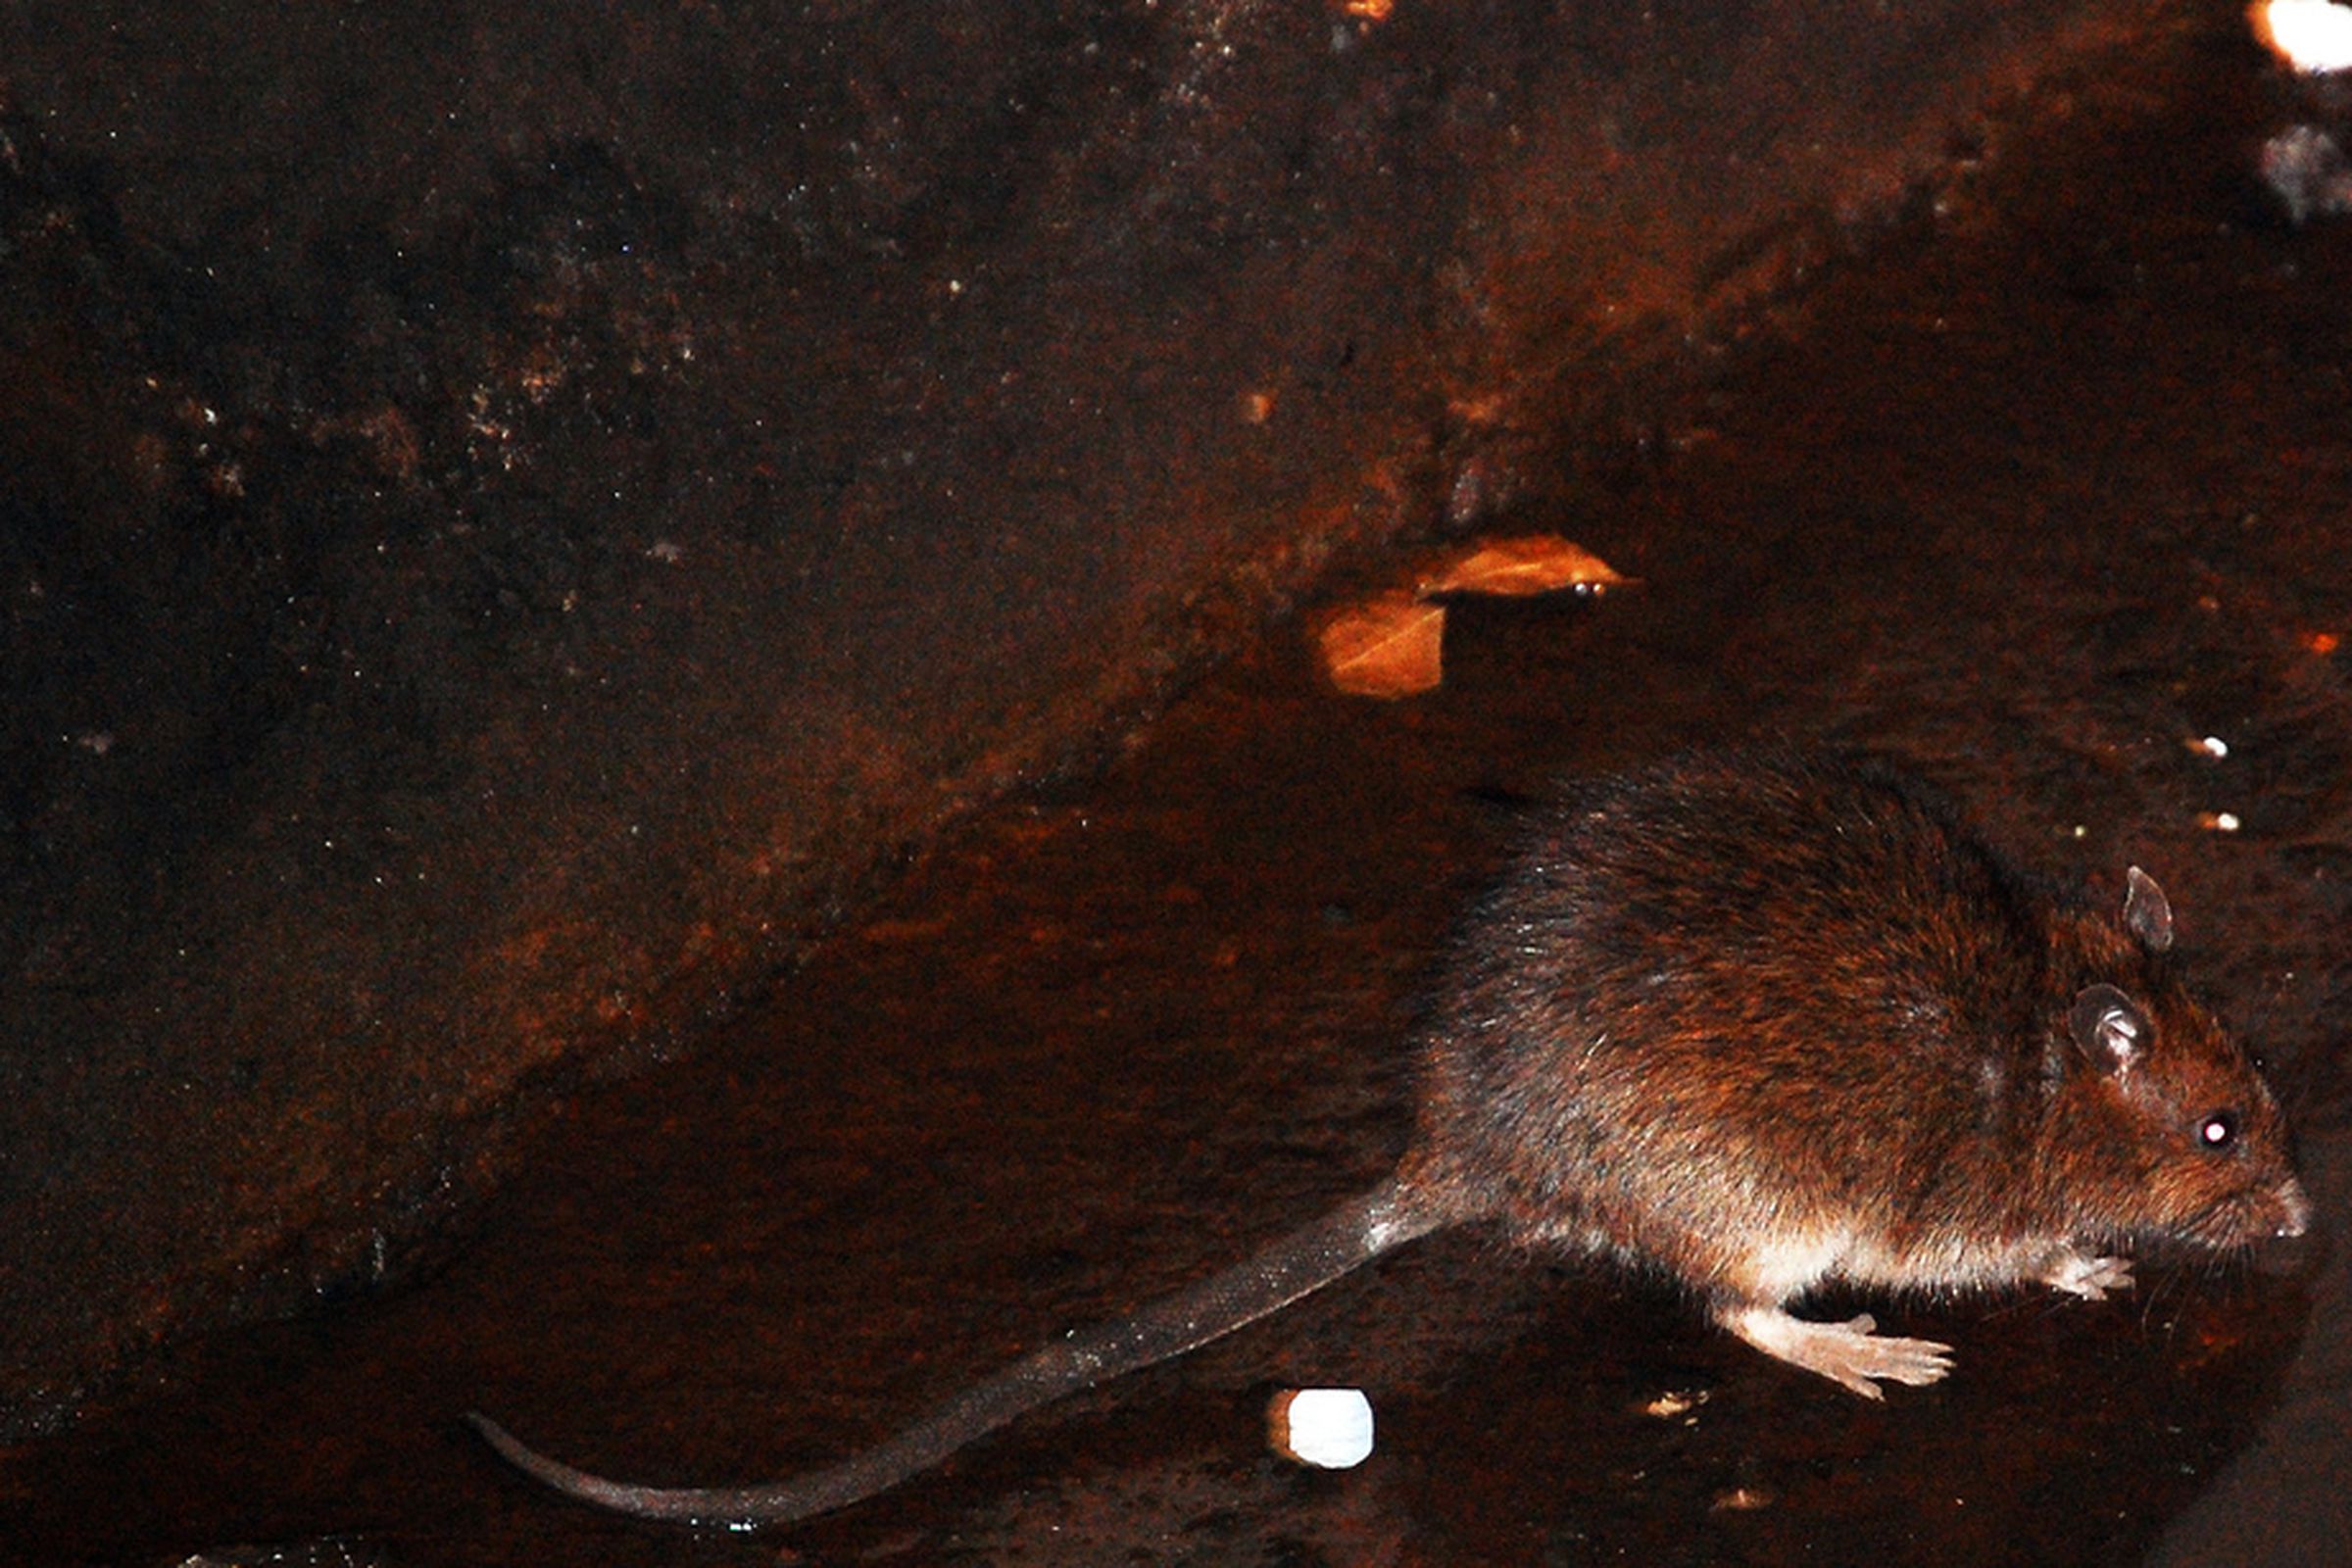 Rat observed in the Atlantic-Pacific subway station in Brooklyn, New York